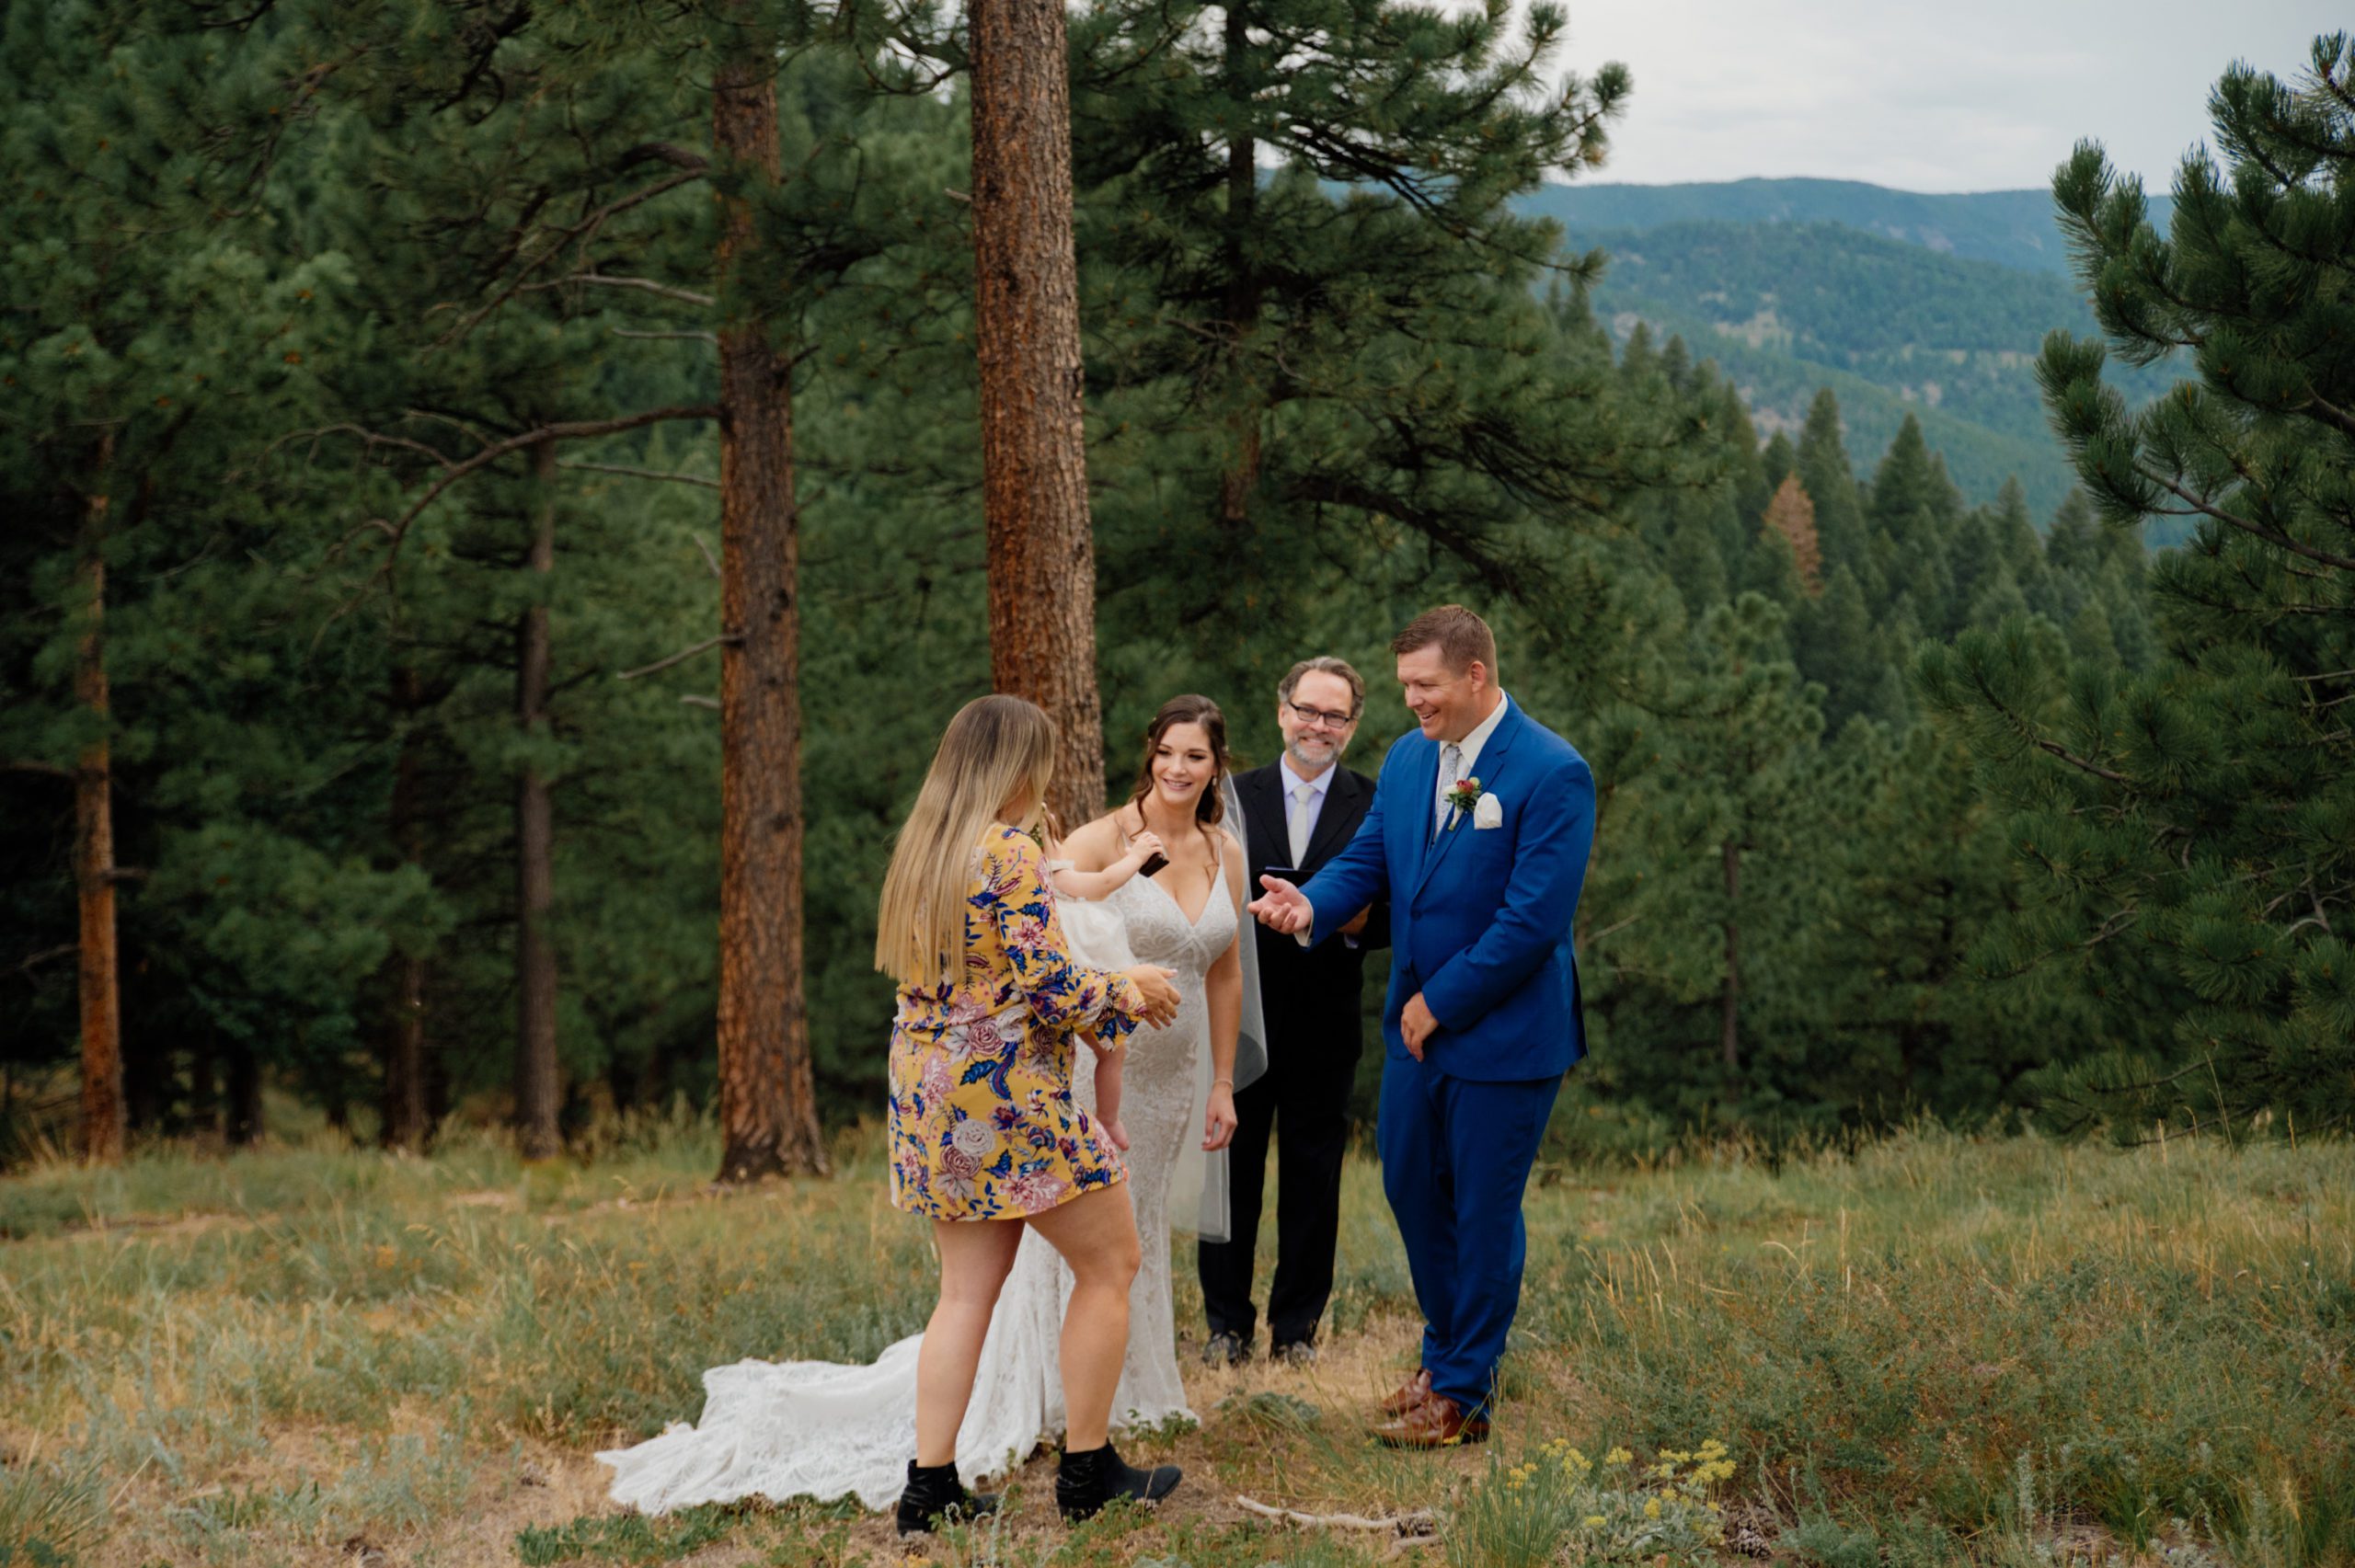 The friend of the couple brings their baby to give them their rings after the ring-warming ceremony during their elopement at artist point 